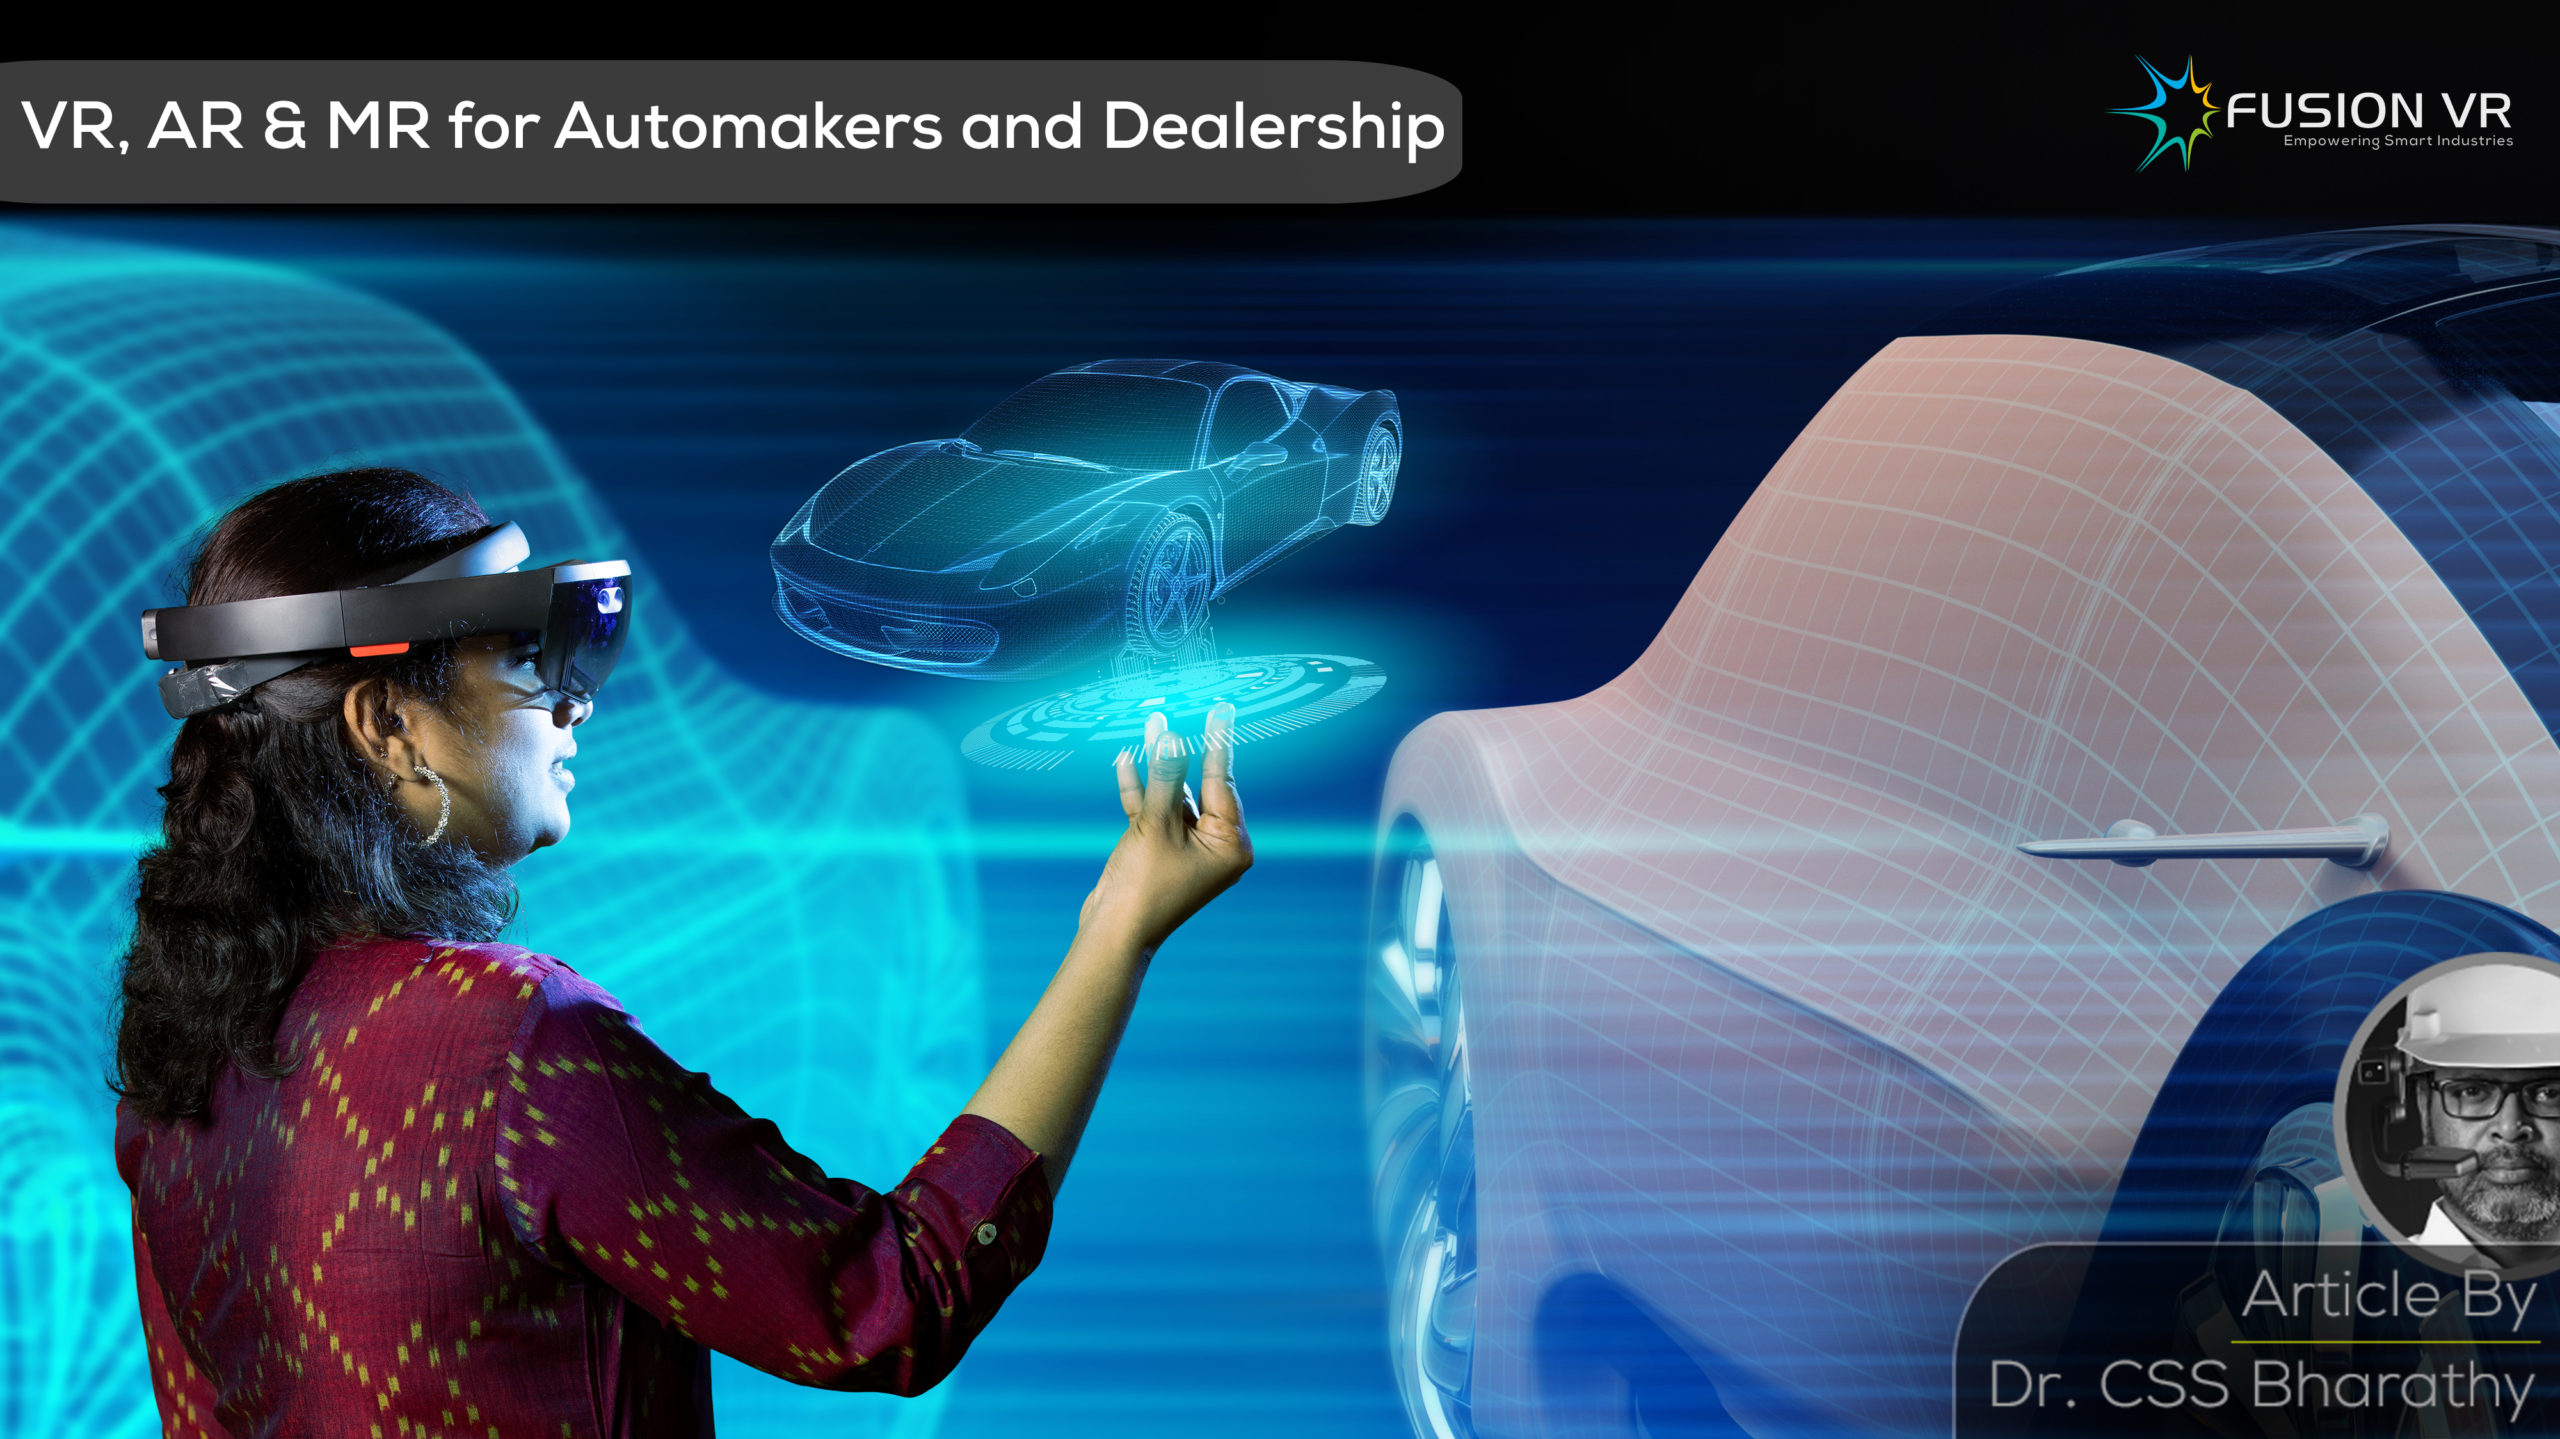 Automakers and Dealerships are Zooming ahead with AR, VR and MR – here’s how!